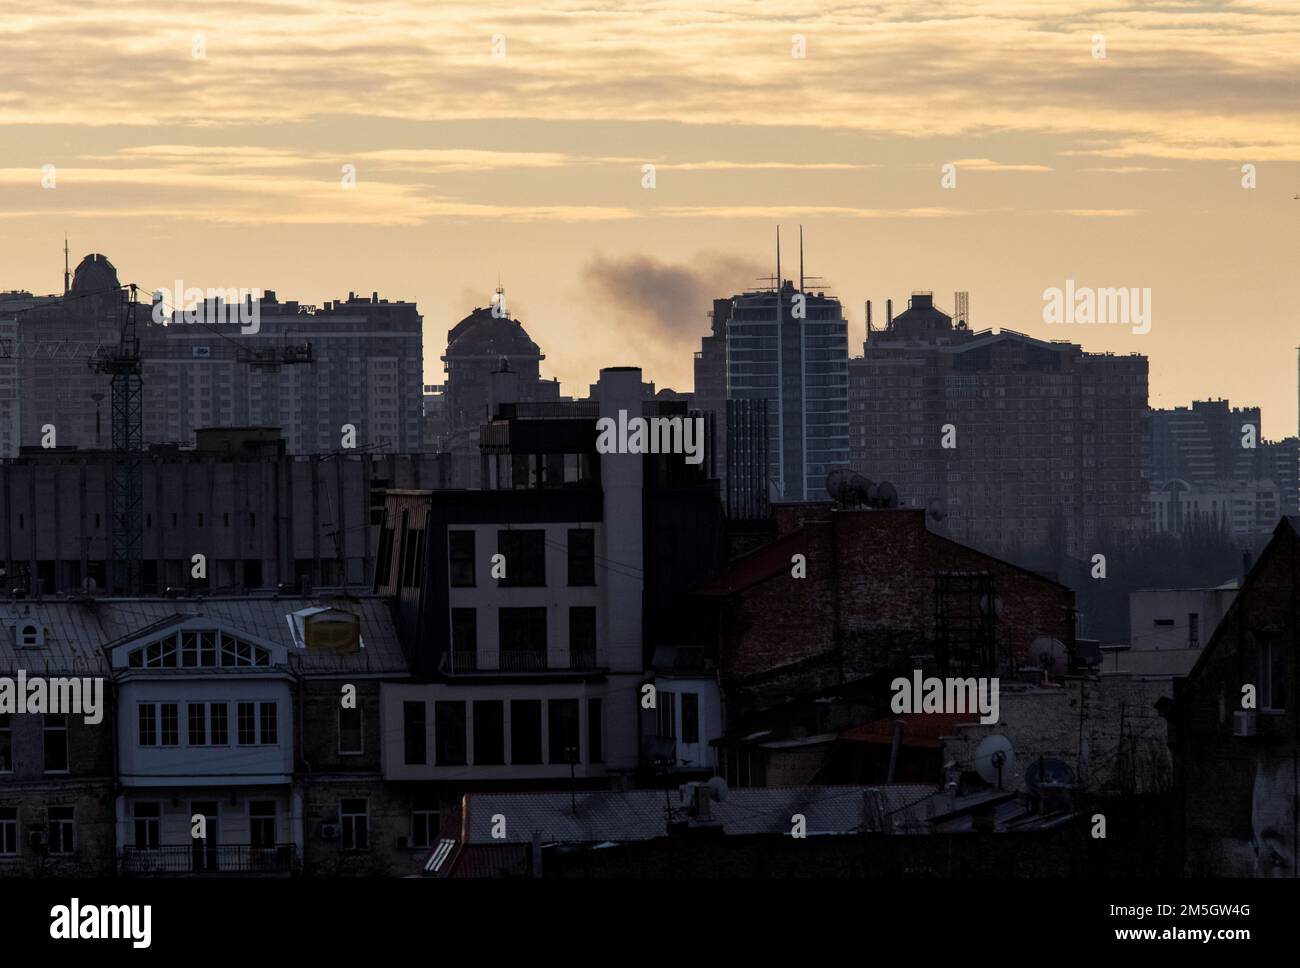 Smoke rises after a missile strike, as Russia's attack on Ukraine continues, in Kyiv, Ukraine December 29, 2022. REUTERS/Anna Voitenko Stock Photo